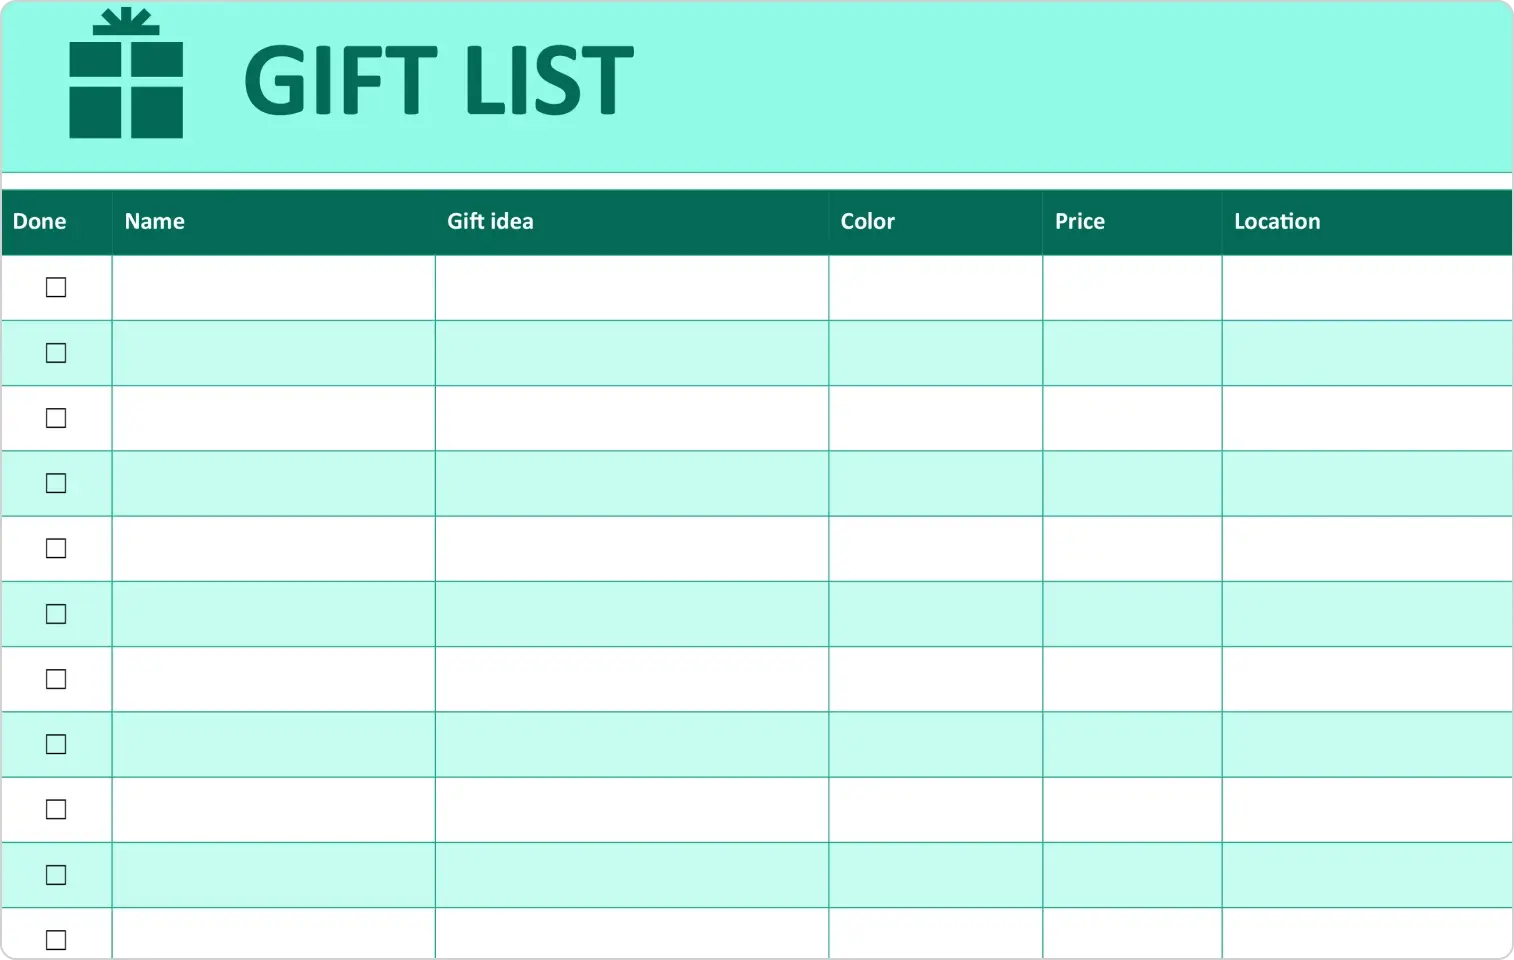 A picture of the gift shopping checklist template